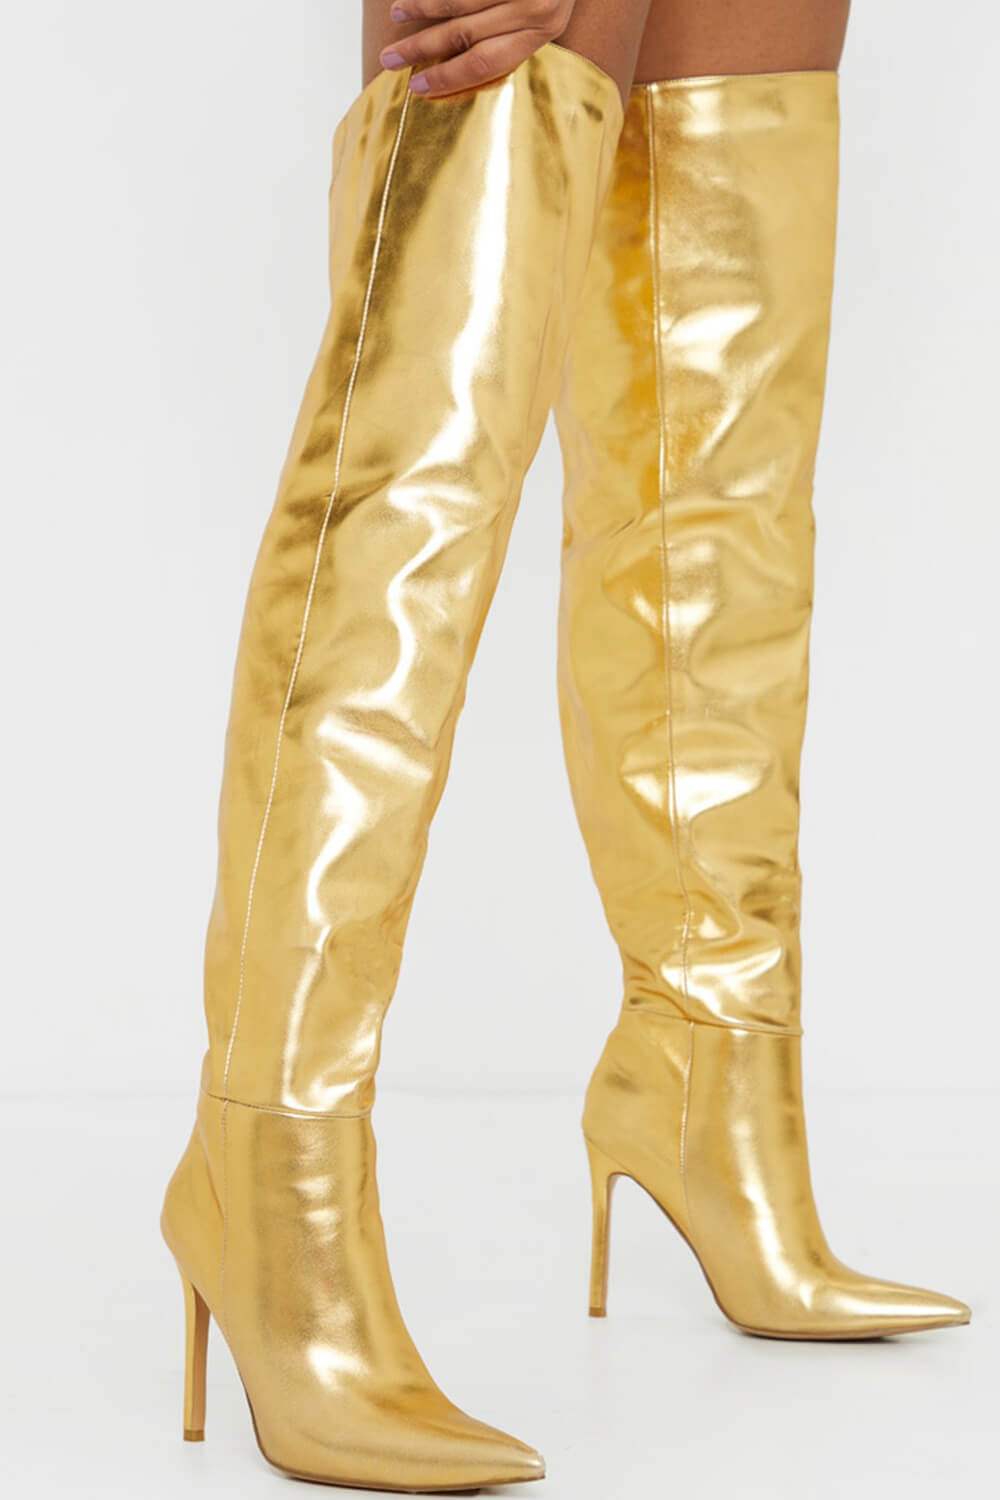 Slouchy Pointed Toe Stiletto Heel Over The Knee Boots - Gold/Silver